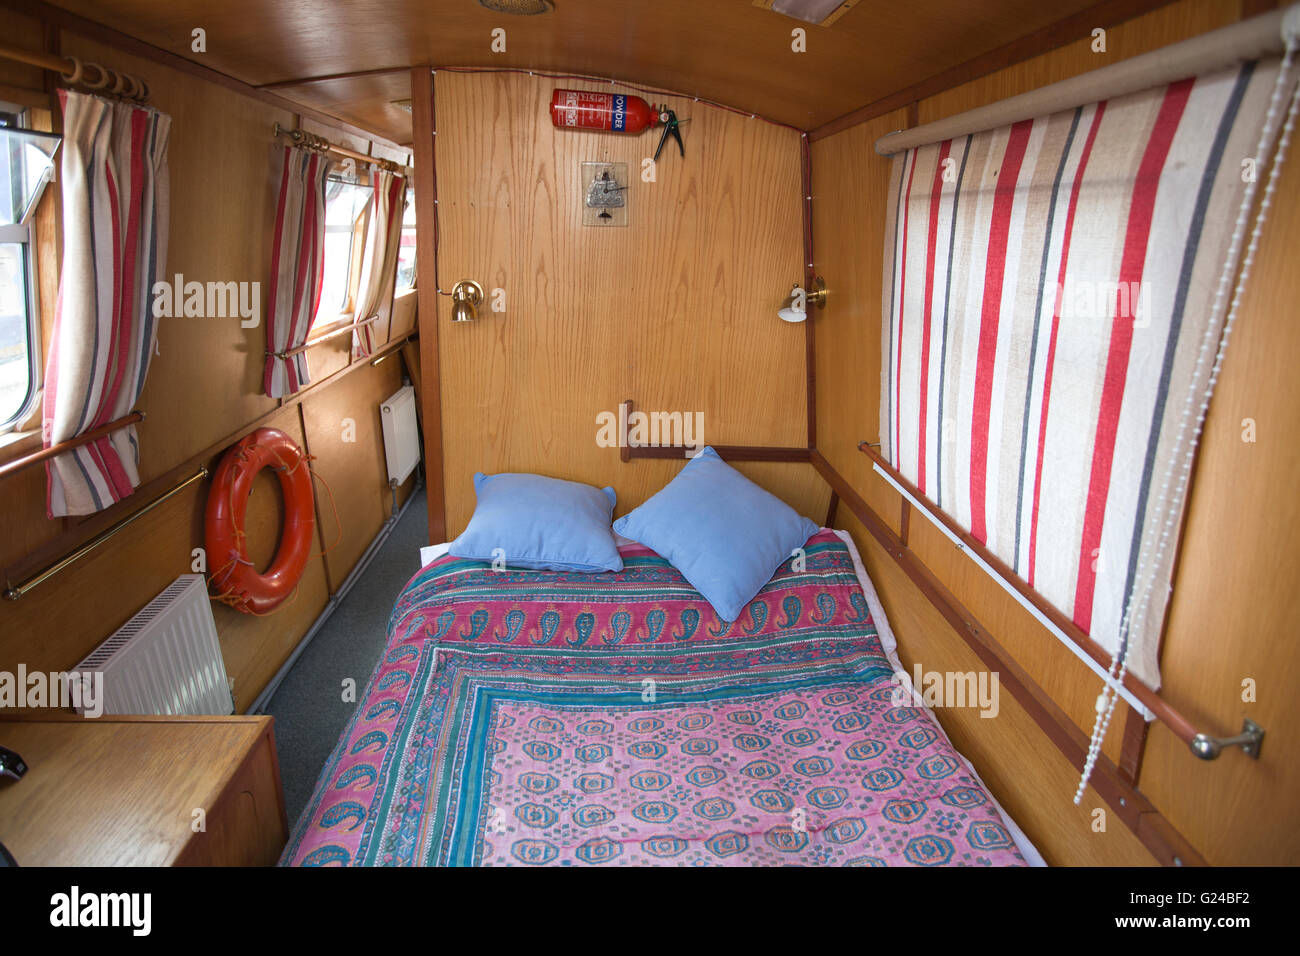 Interior of a canal boat moored at Brentford Dock Marina, West London, situated on the River Thames, England, UK Stock Photo